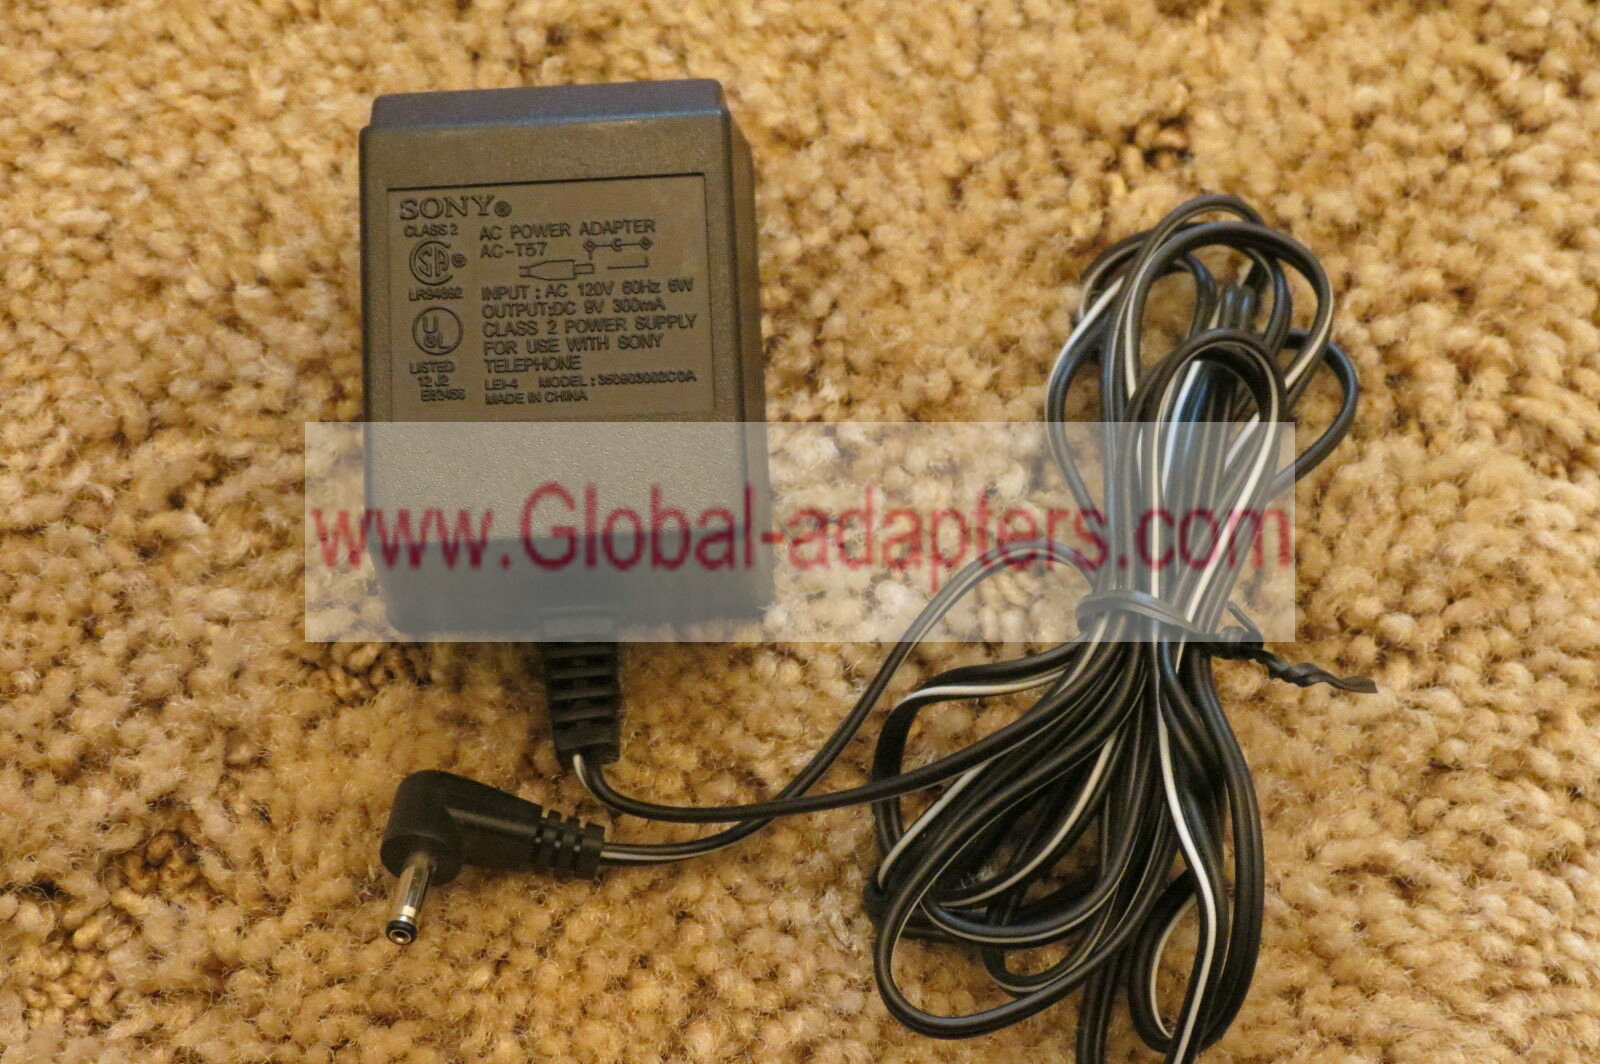 NEW SONY 9V 300mA AC-T57 AC/DC WALL WART POWER SUPPLY ADAPTER